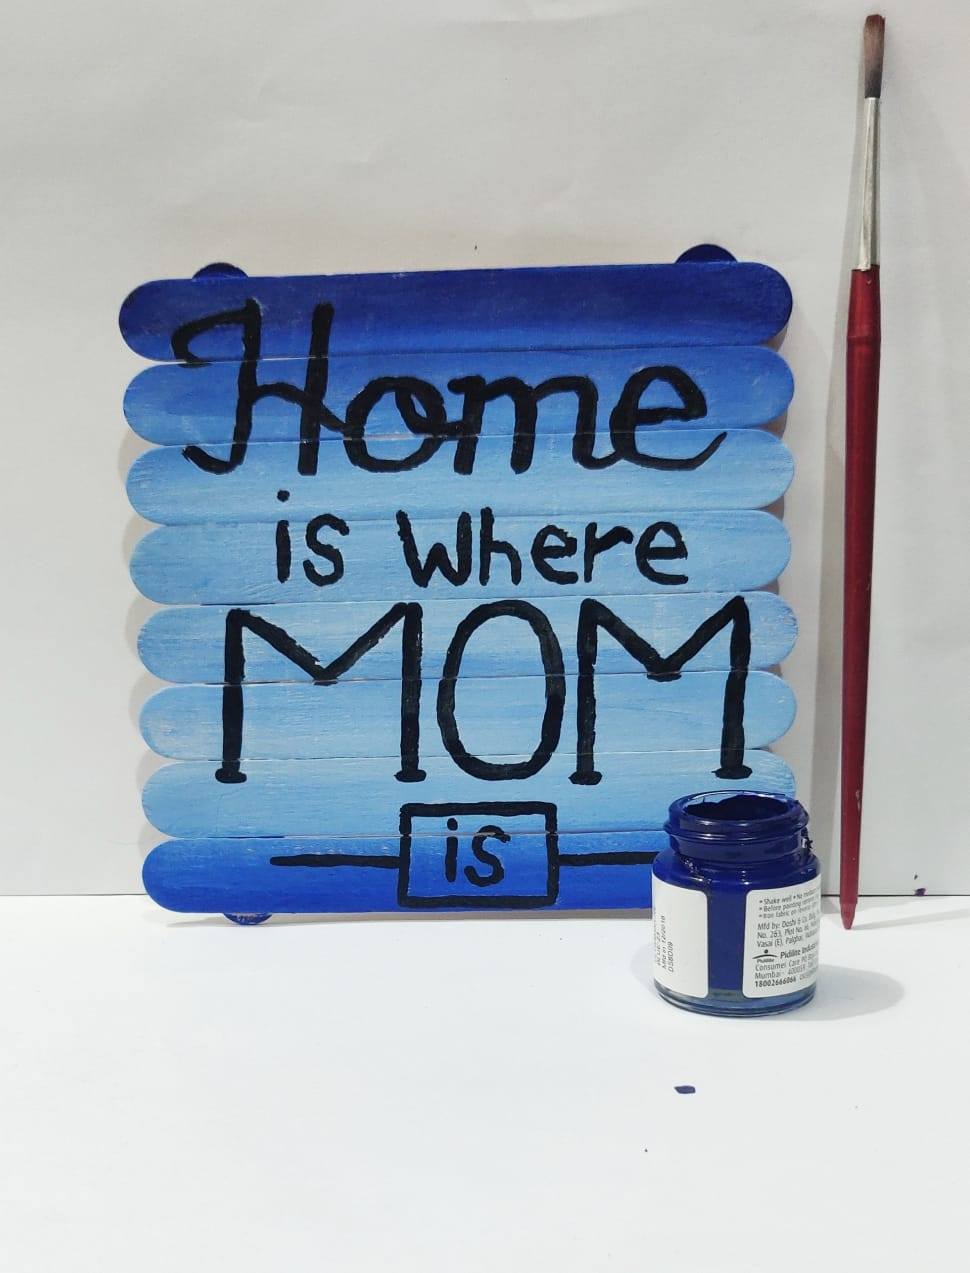 Home is where mom is - Wall hanging